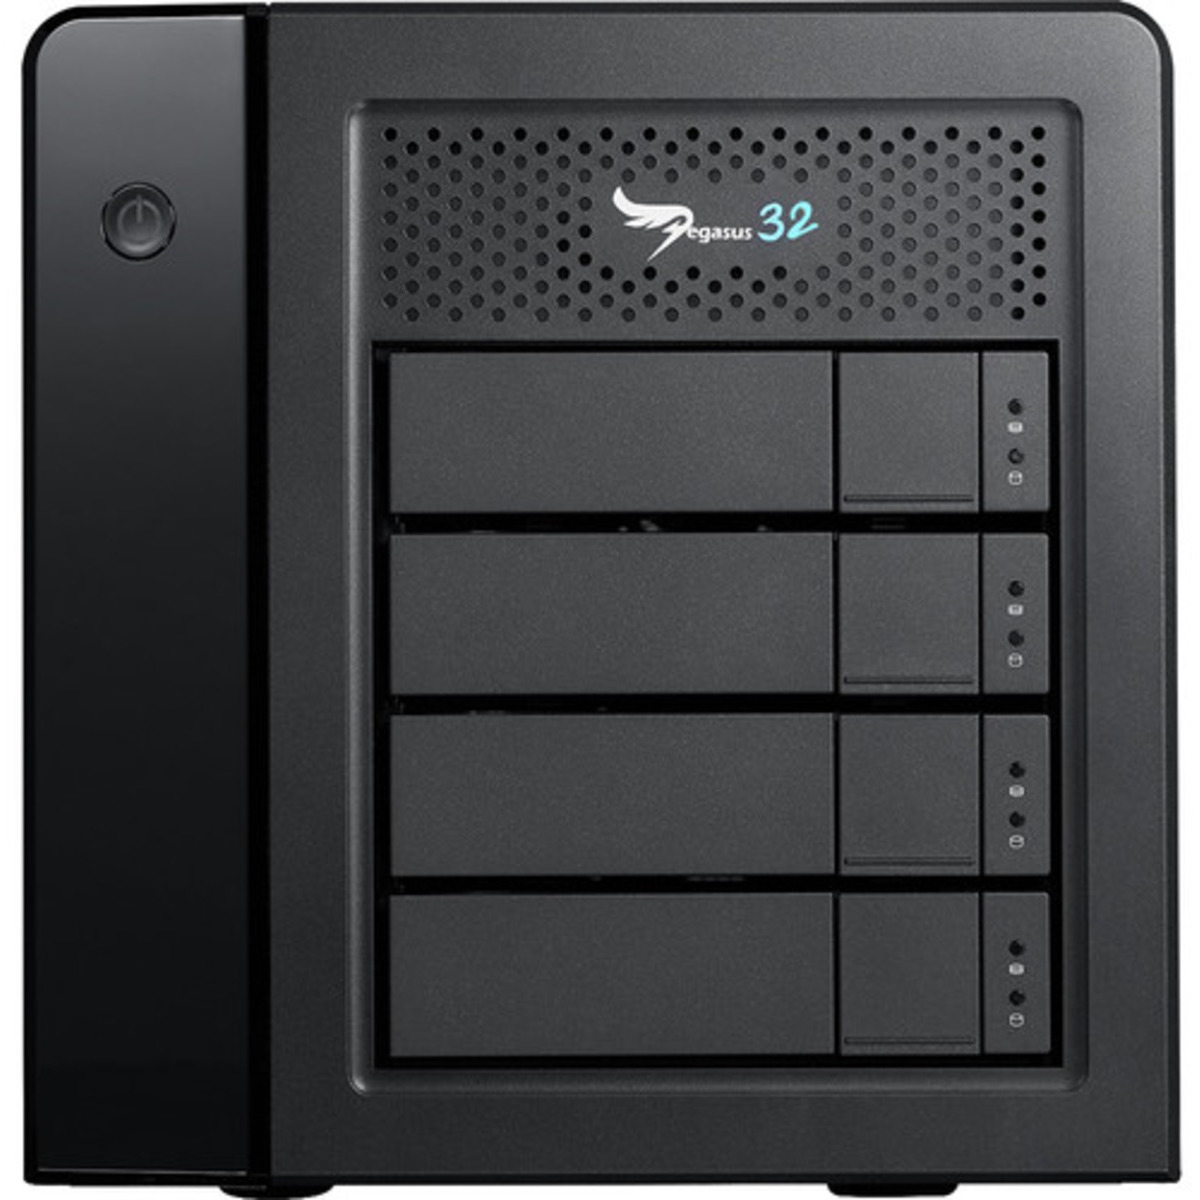 Promise Technology Pegasus32 R4 Thunderbolt 3 88tb 4-Bay Desktop Multimedia / Power User / Business DAS - Direct Attached Storage Device 4x22tb Seagate IronWolf Pro ST22000NT001 3.5 7200rpm SATA 6Gb/s HDD NAS Class Drives Installed - Burn-In Tested Pegasus32 R4 Thunderbolt 3